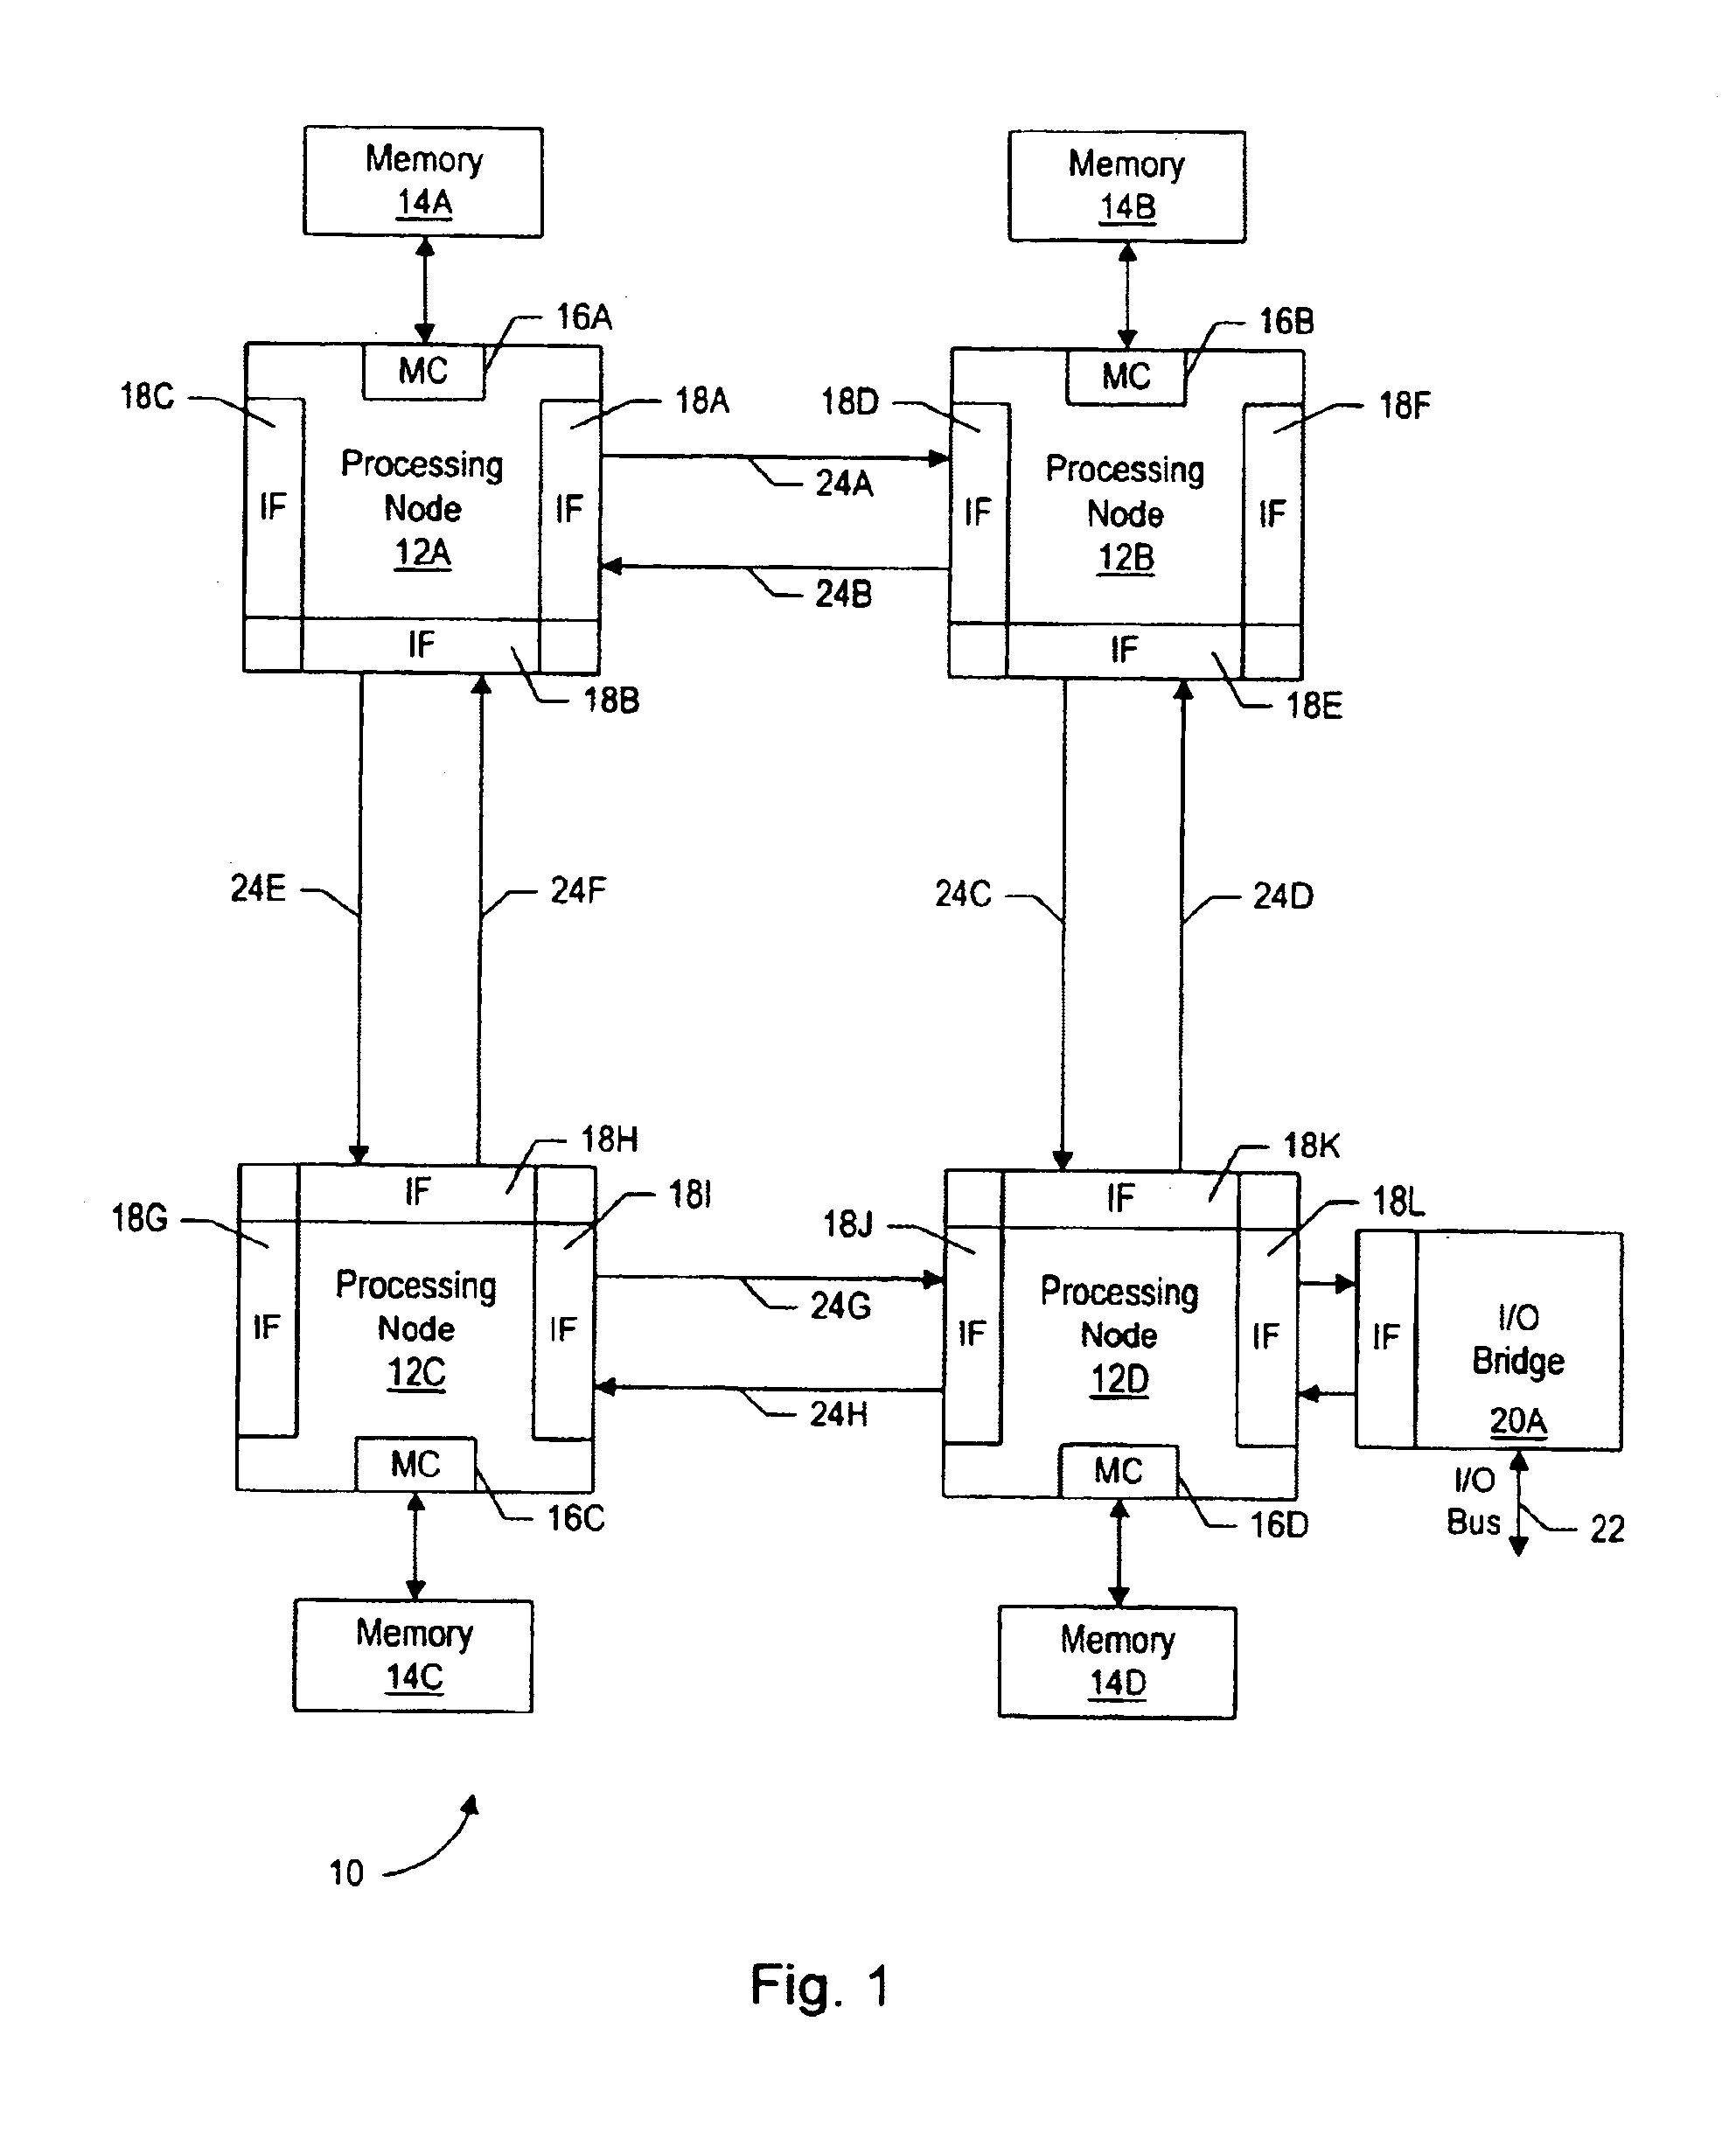 Virtual channels and corresponding buffer allocations for deadlock-free computer system operation